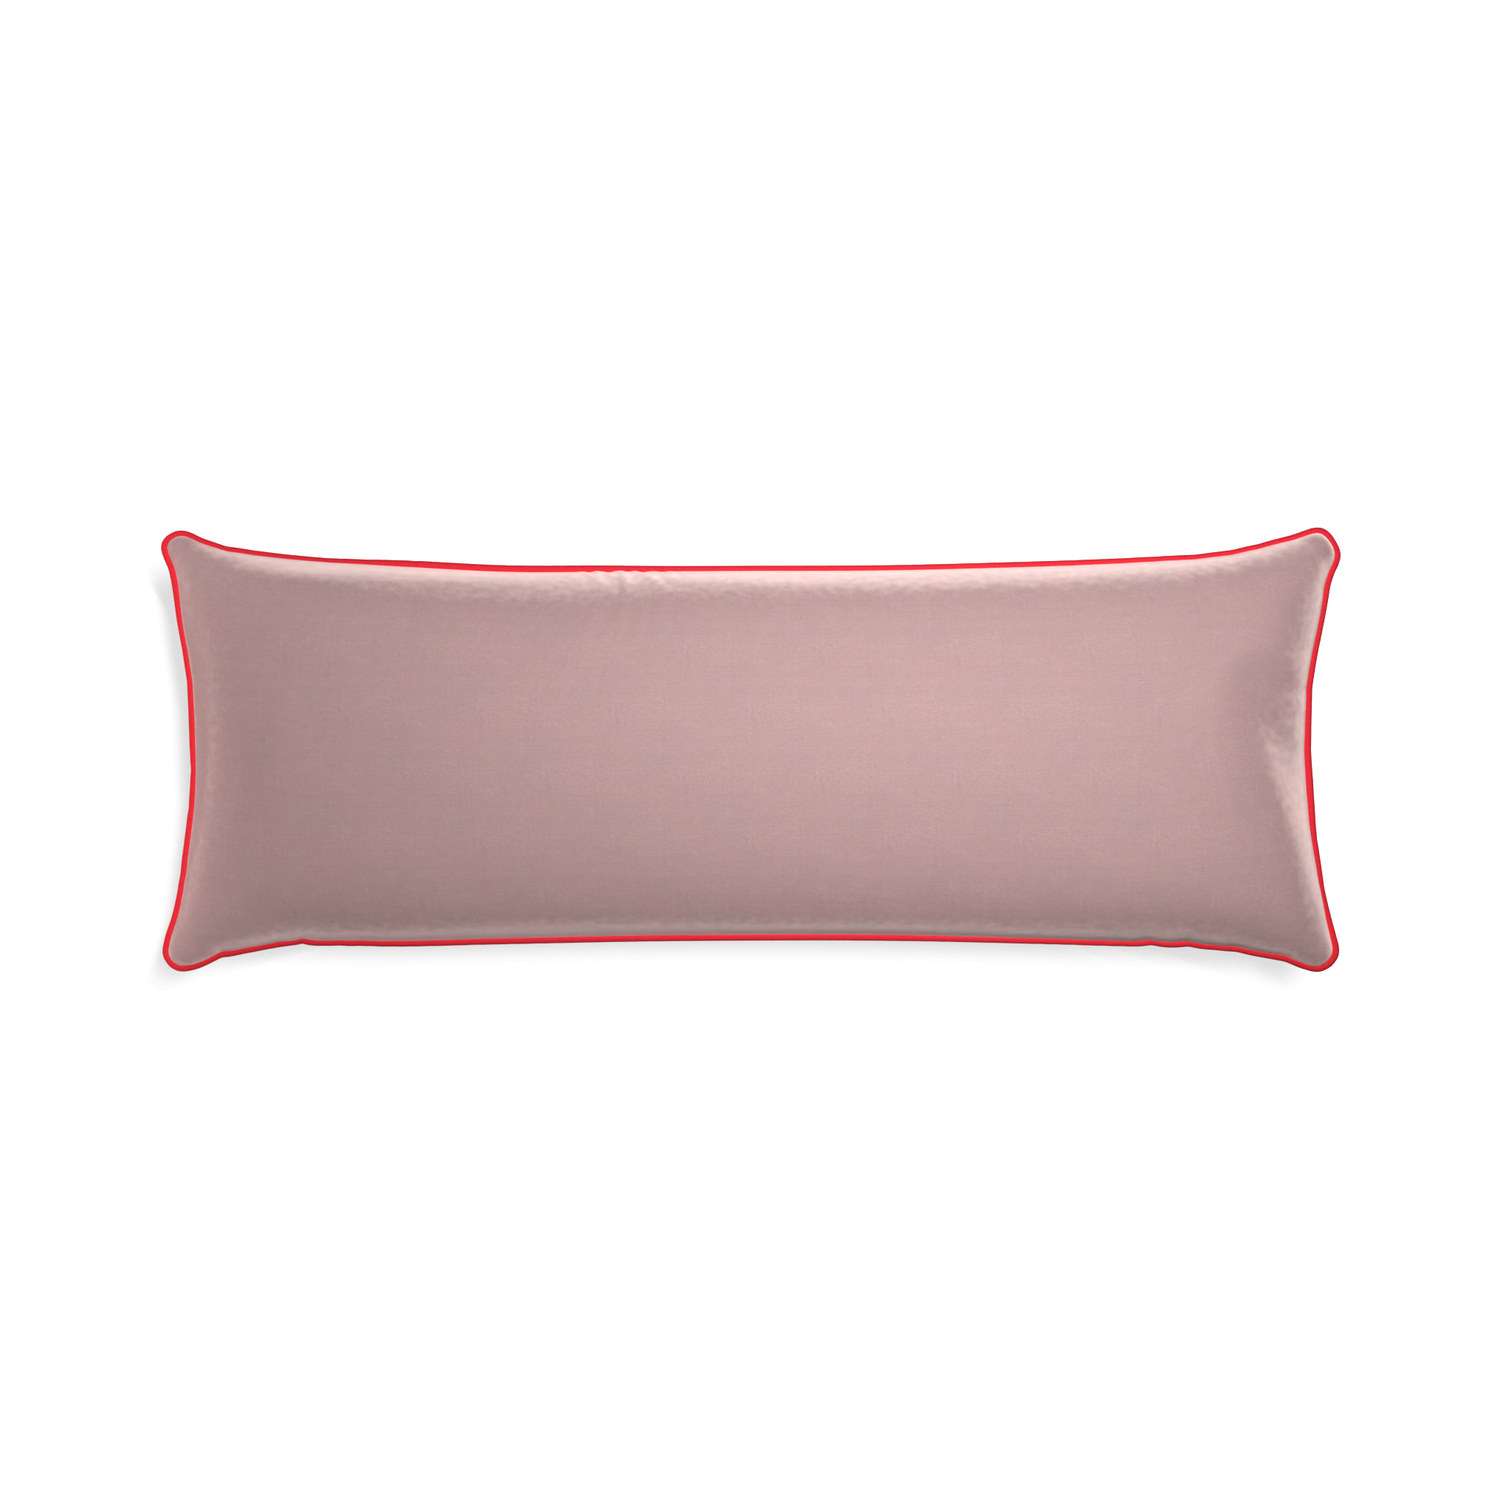 rectangle mauve velvet pillow with red piping